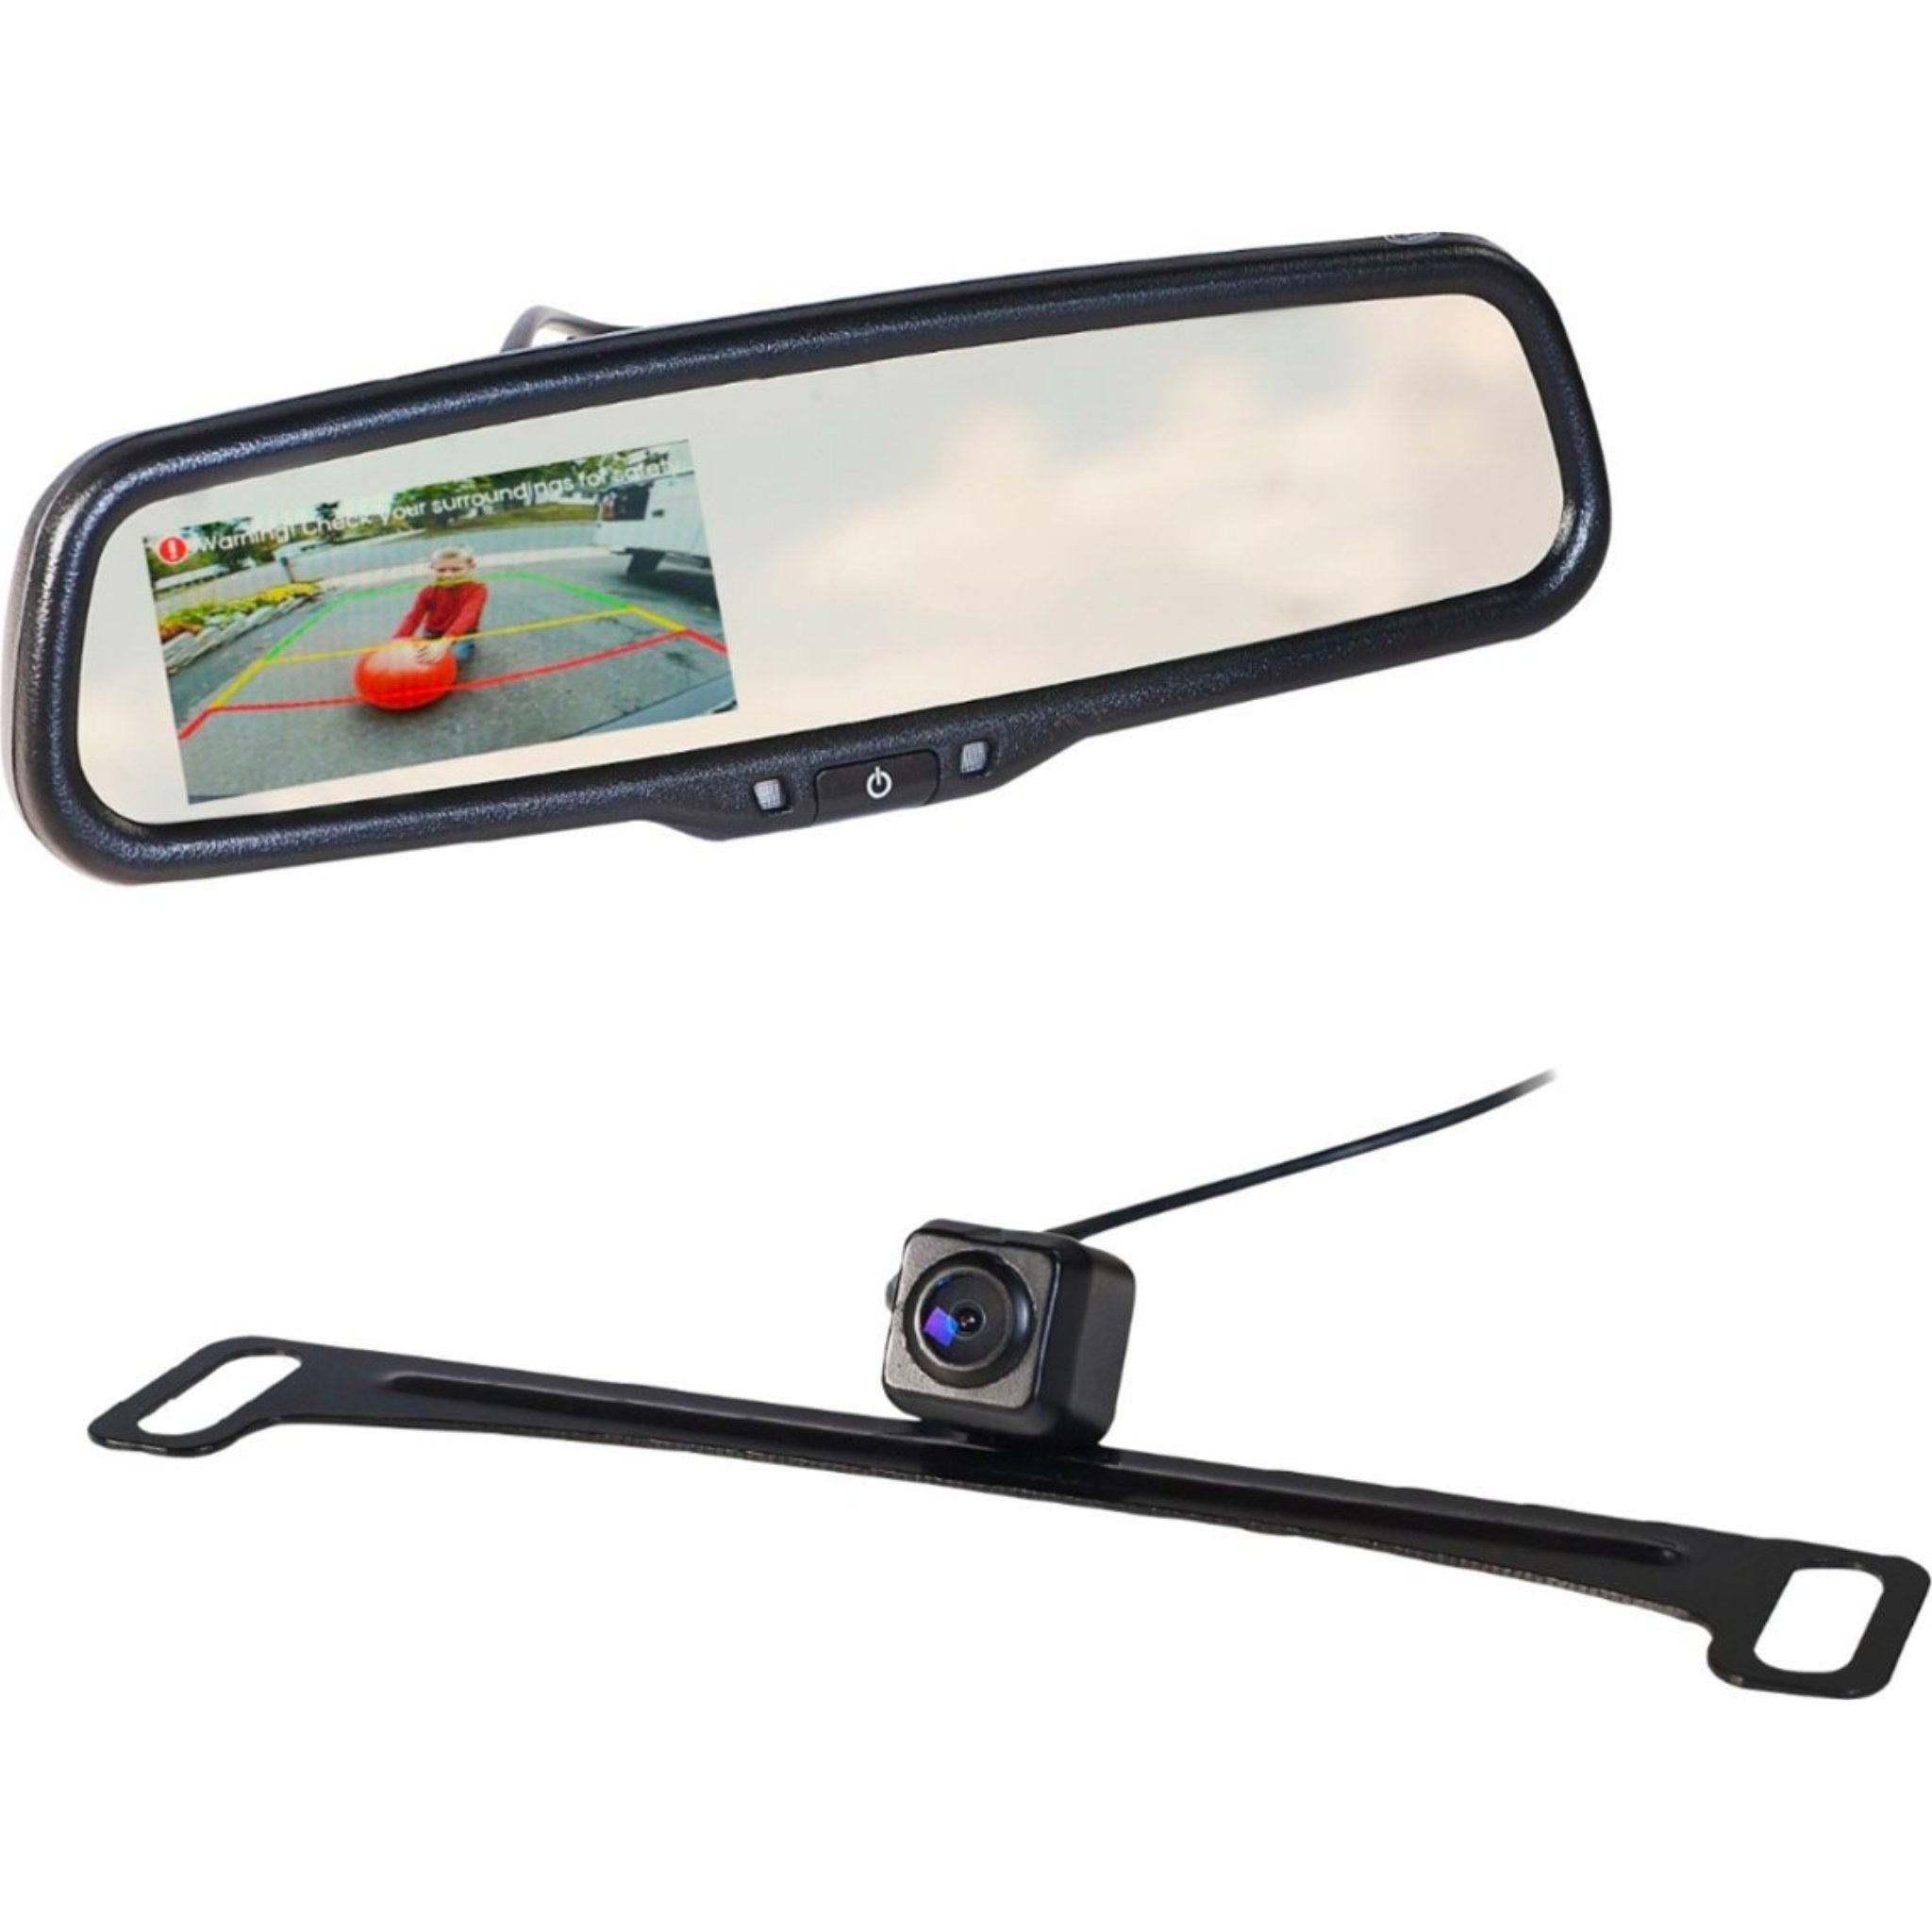 4.3" Replacement Rear-View Mirror Monitor with Backup Camera Kit